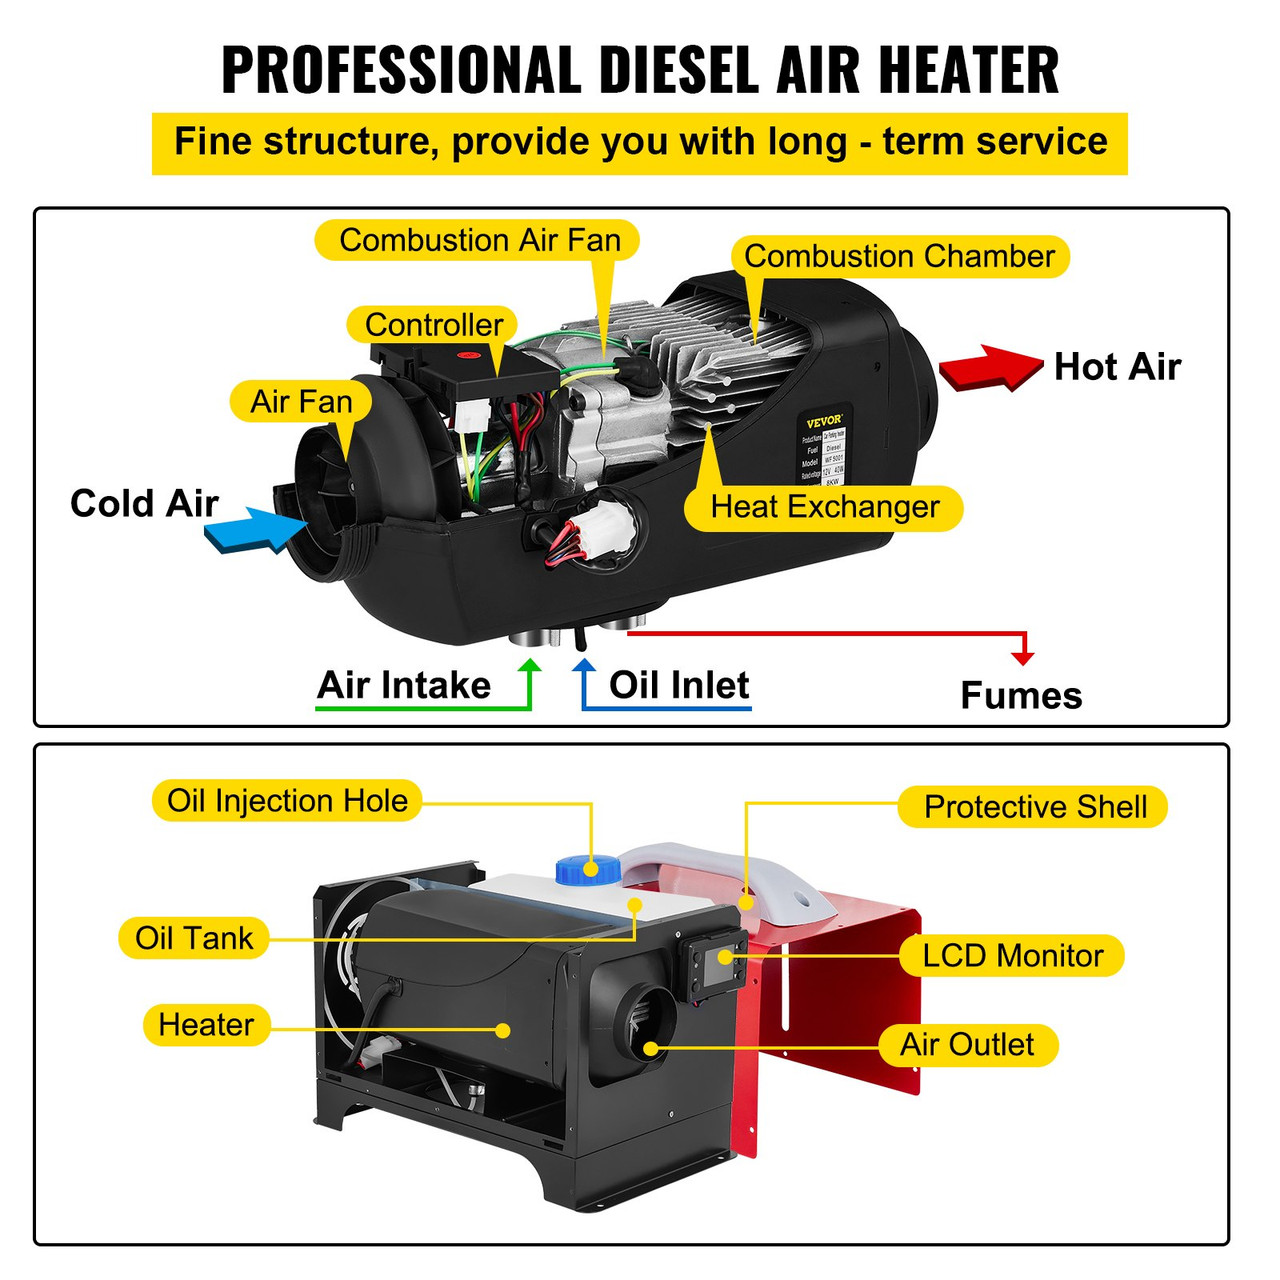 Diesel Air Heater, 5KW 12V Parking Heater, Mini Truck Heater, Single Outlet Hole, with Black LCD, Remote Control, Fast Heating Diesel Heater, For RV Truck, Boat, Bus, Car Trailer, Motorhomes